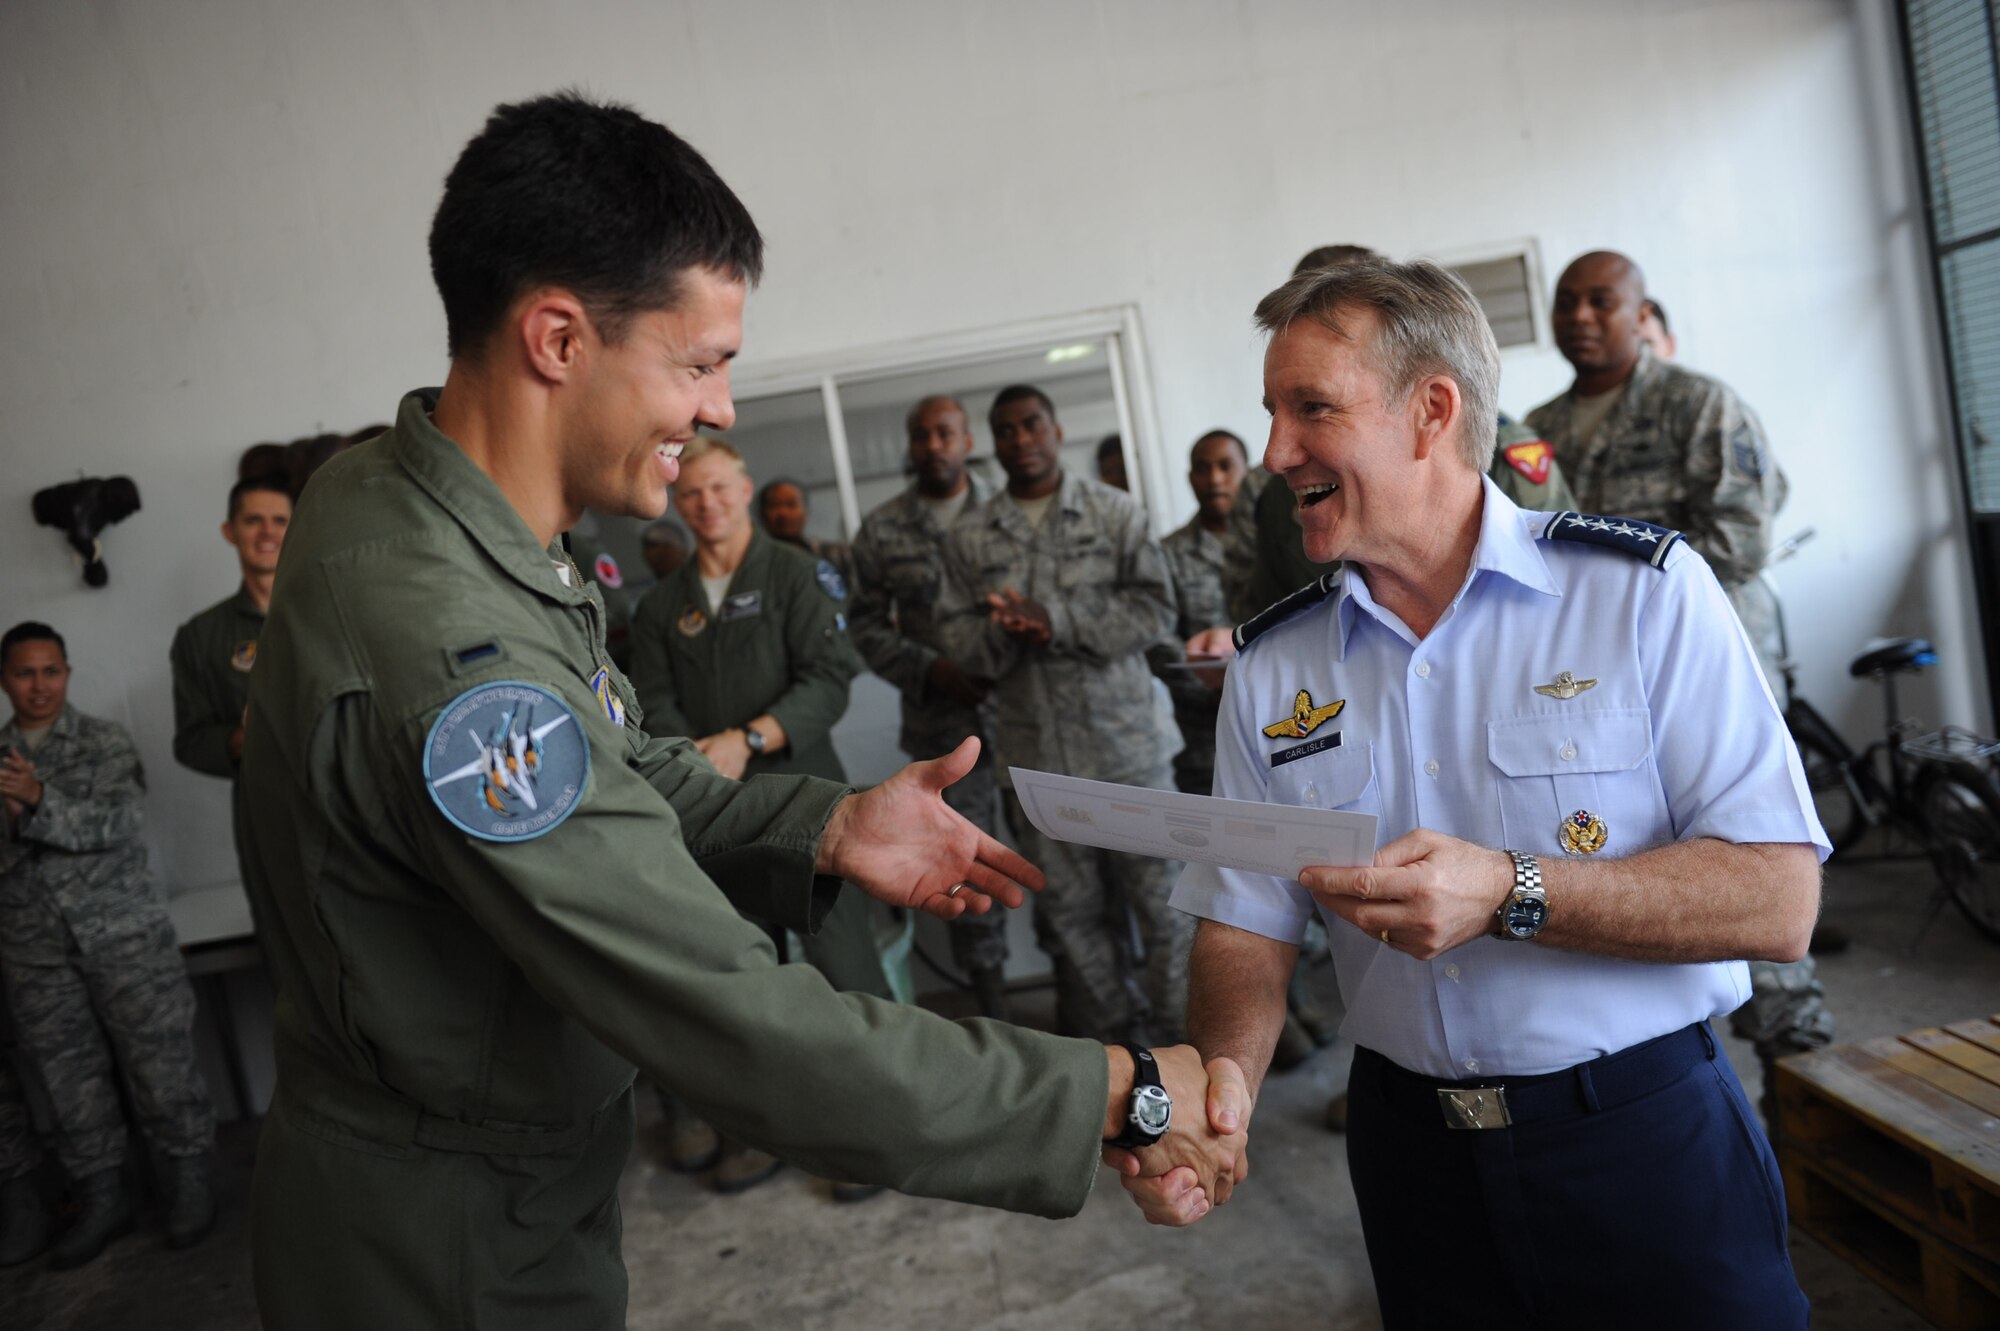 U.S. Air Force Gen. Hawk Carlisle, commander of Pacific Air Forces, presents certificates of appreciation for outstanding performance to Airmen before the closing ceremony for Cope Tiger 13 at Korat Royal Thai Air Force Base, Thailand, March 22, 2013. More than 300 U.S. service members are participating in CT13, which offers an unparalleled opportunity to conduct a wide spectrum of large force employment air operations and strengthen military-to-military ties with two key partner nations, Thailand and Singapore. (U.S. Air Force photo/2nd Lt. Jake Bailey)